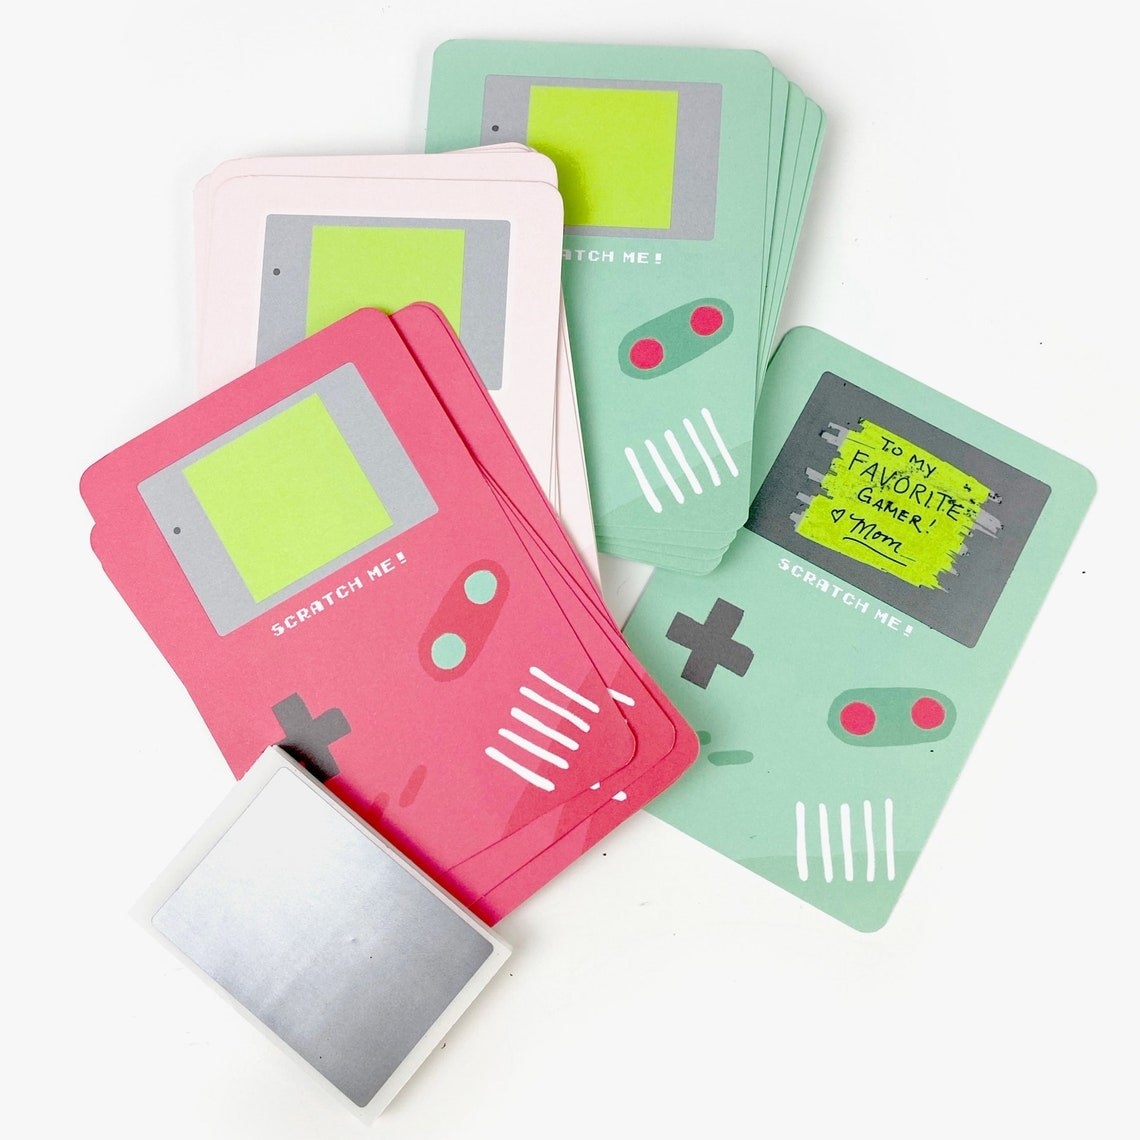 a bunch of scratch-off cards that look like gameboy systems